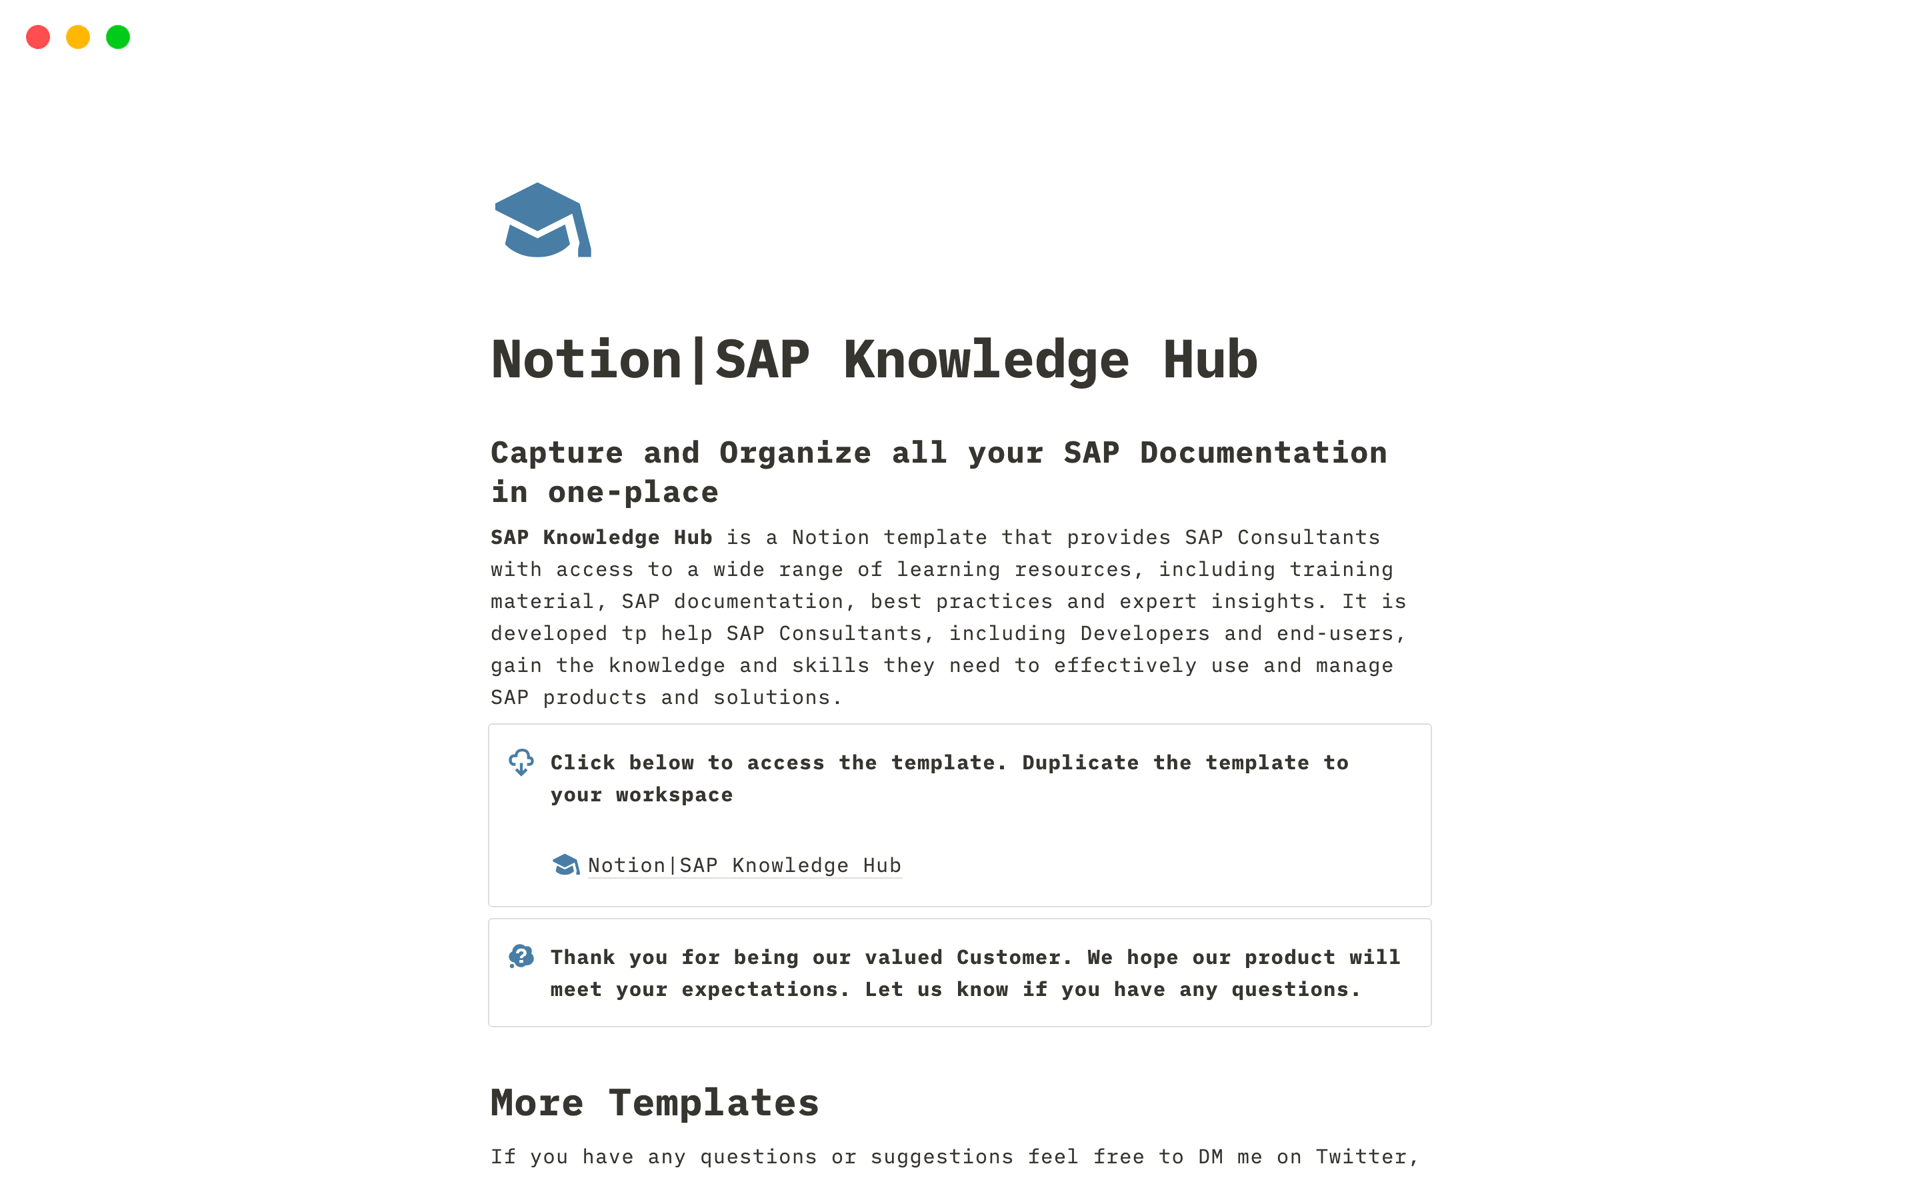 SAP Knowledge Hub is a Notion template that provides SAP Consultants with access to a wide range of learning resources, including training material, SAP documentation, best practices and expert insights.